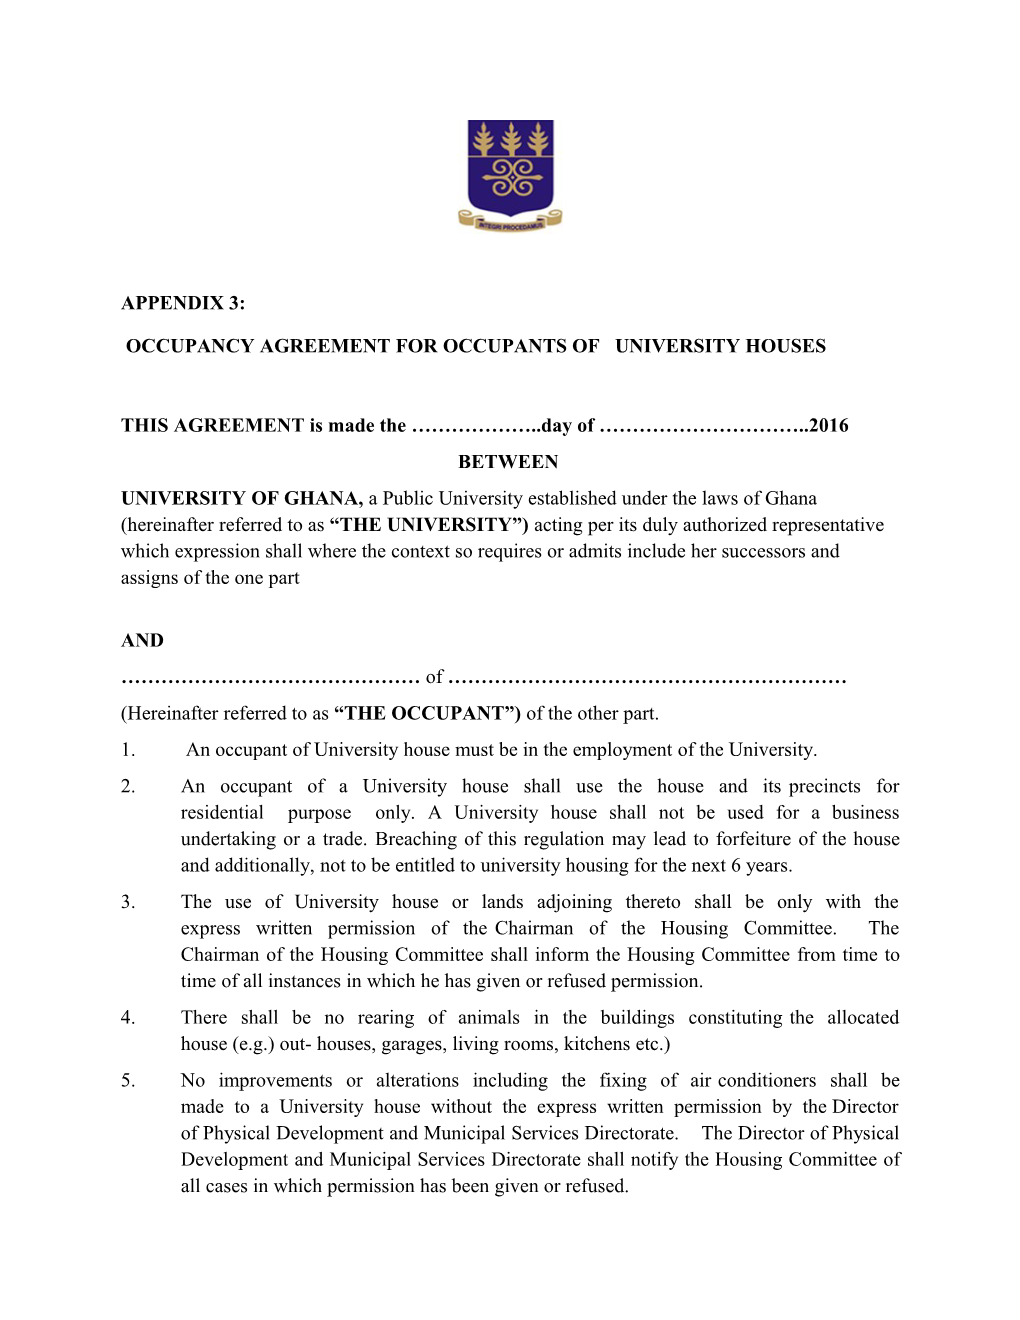 Occupancy Agreement for Occupants of University Houses